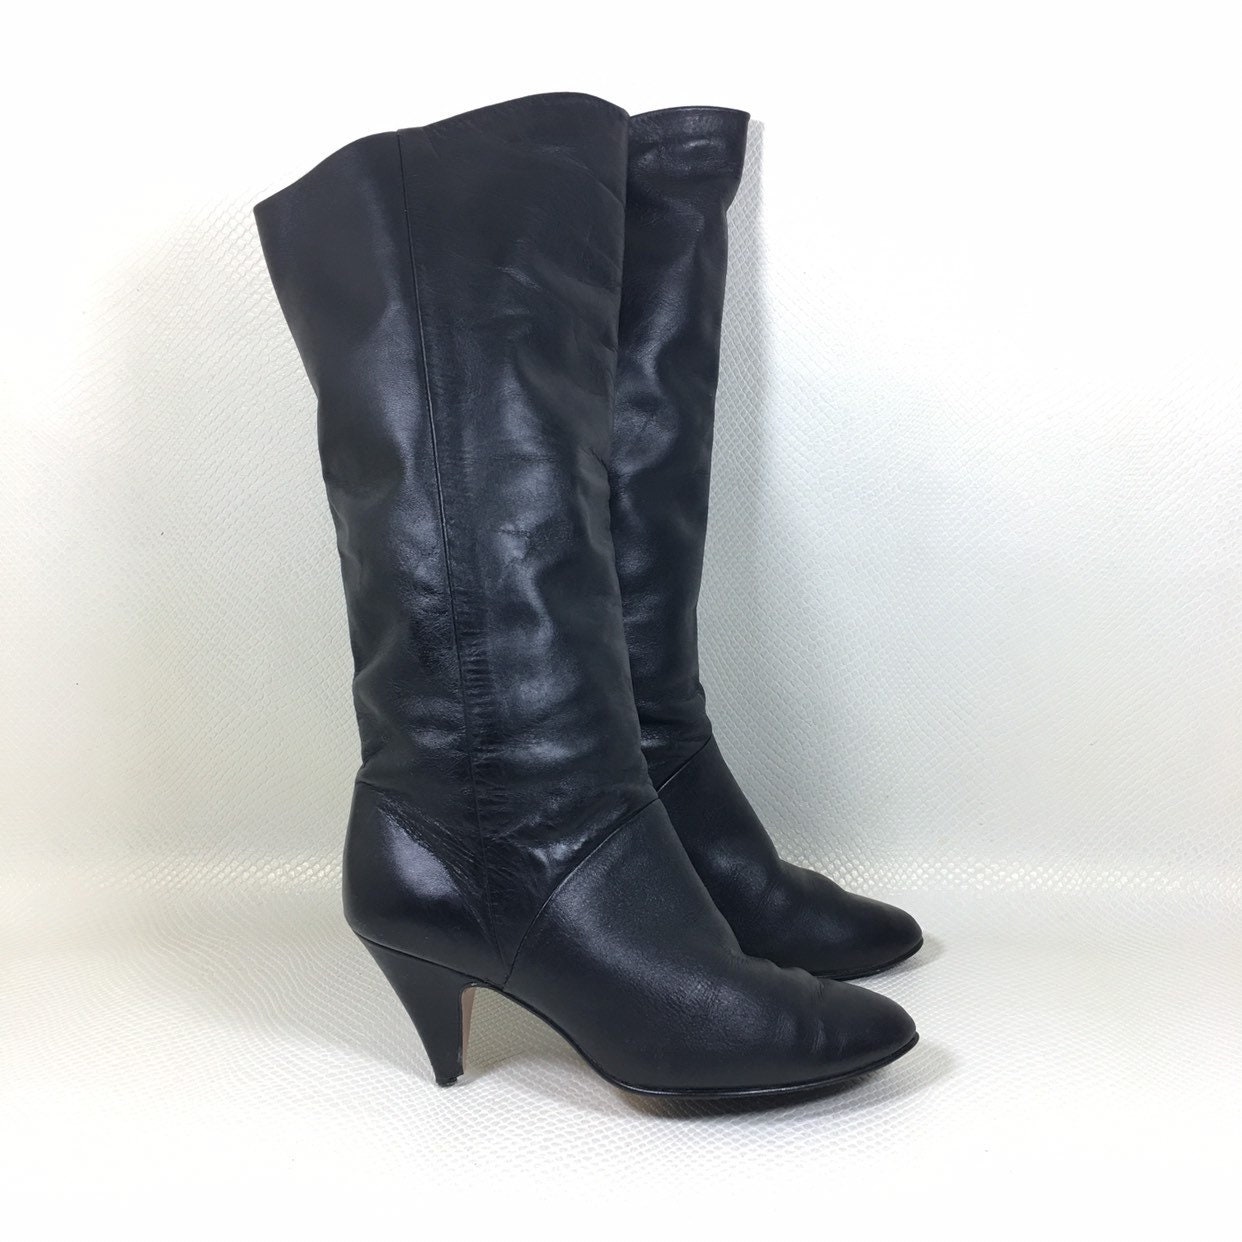 80s Vintage Round Toe Cone Heel Soft Black Leather Knee High Boots 7 ...